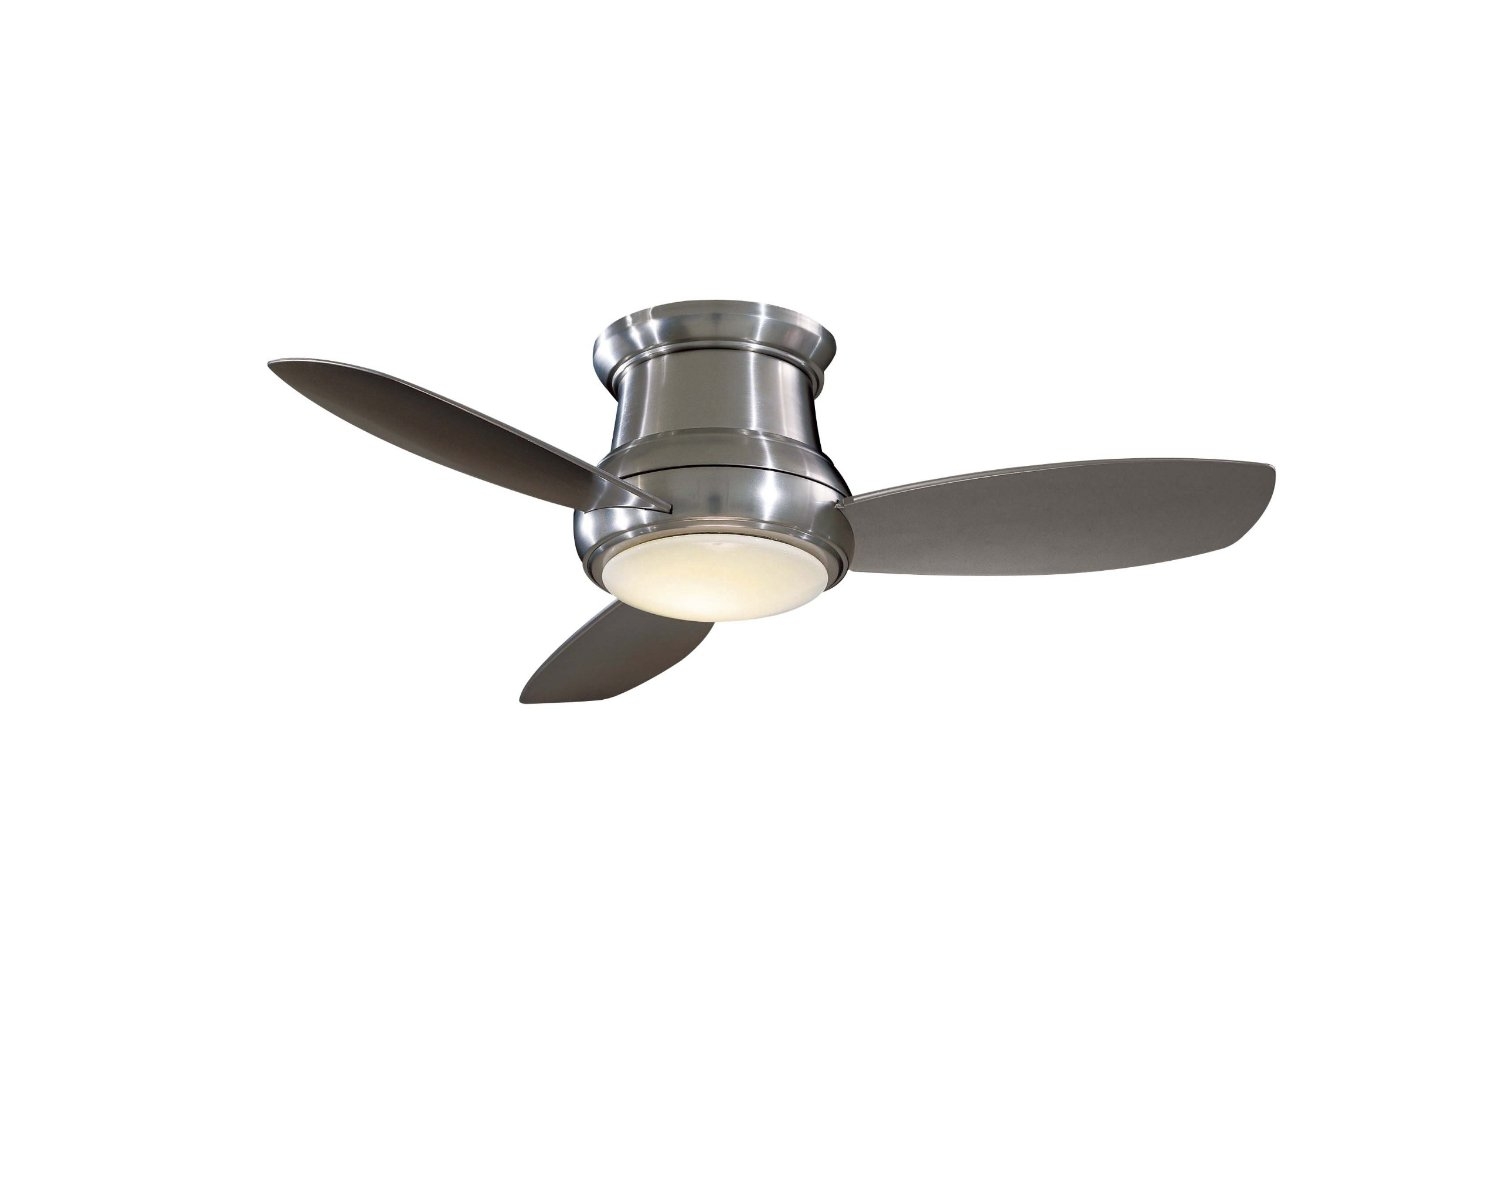 Permalink to Small Hugger Ceiling Fans With Light